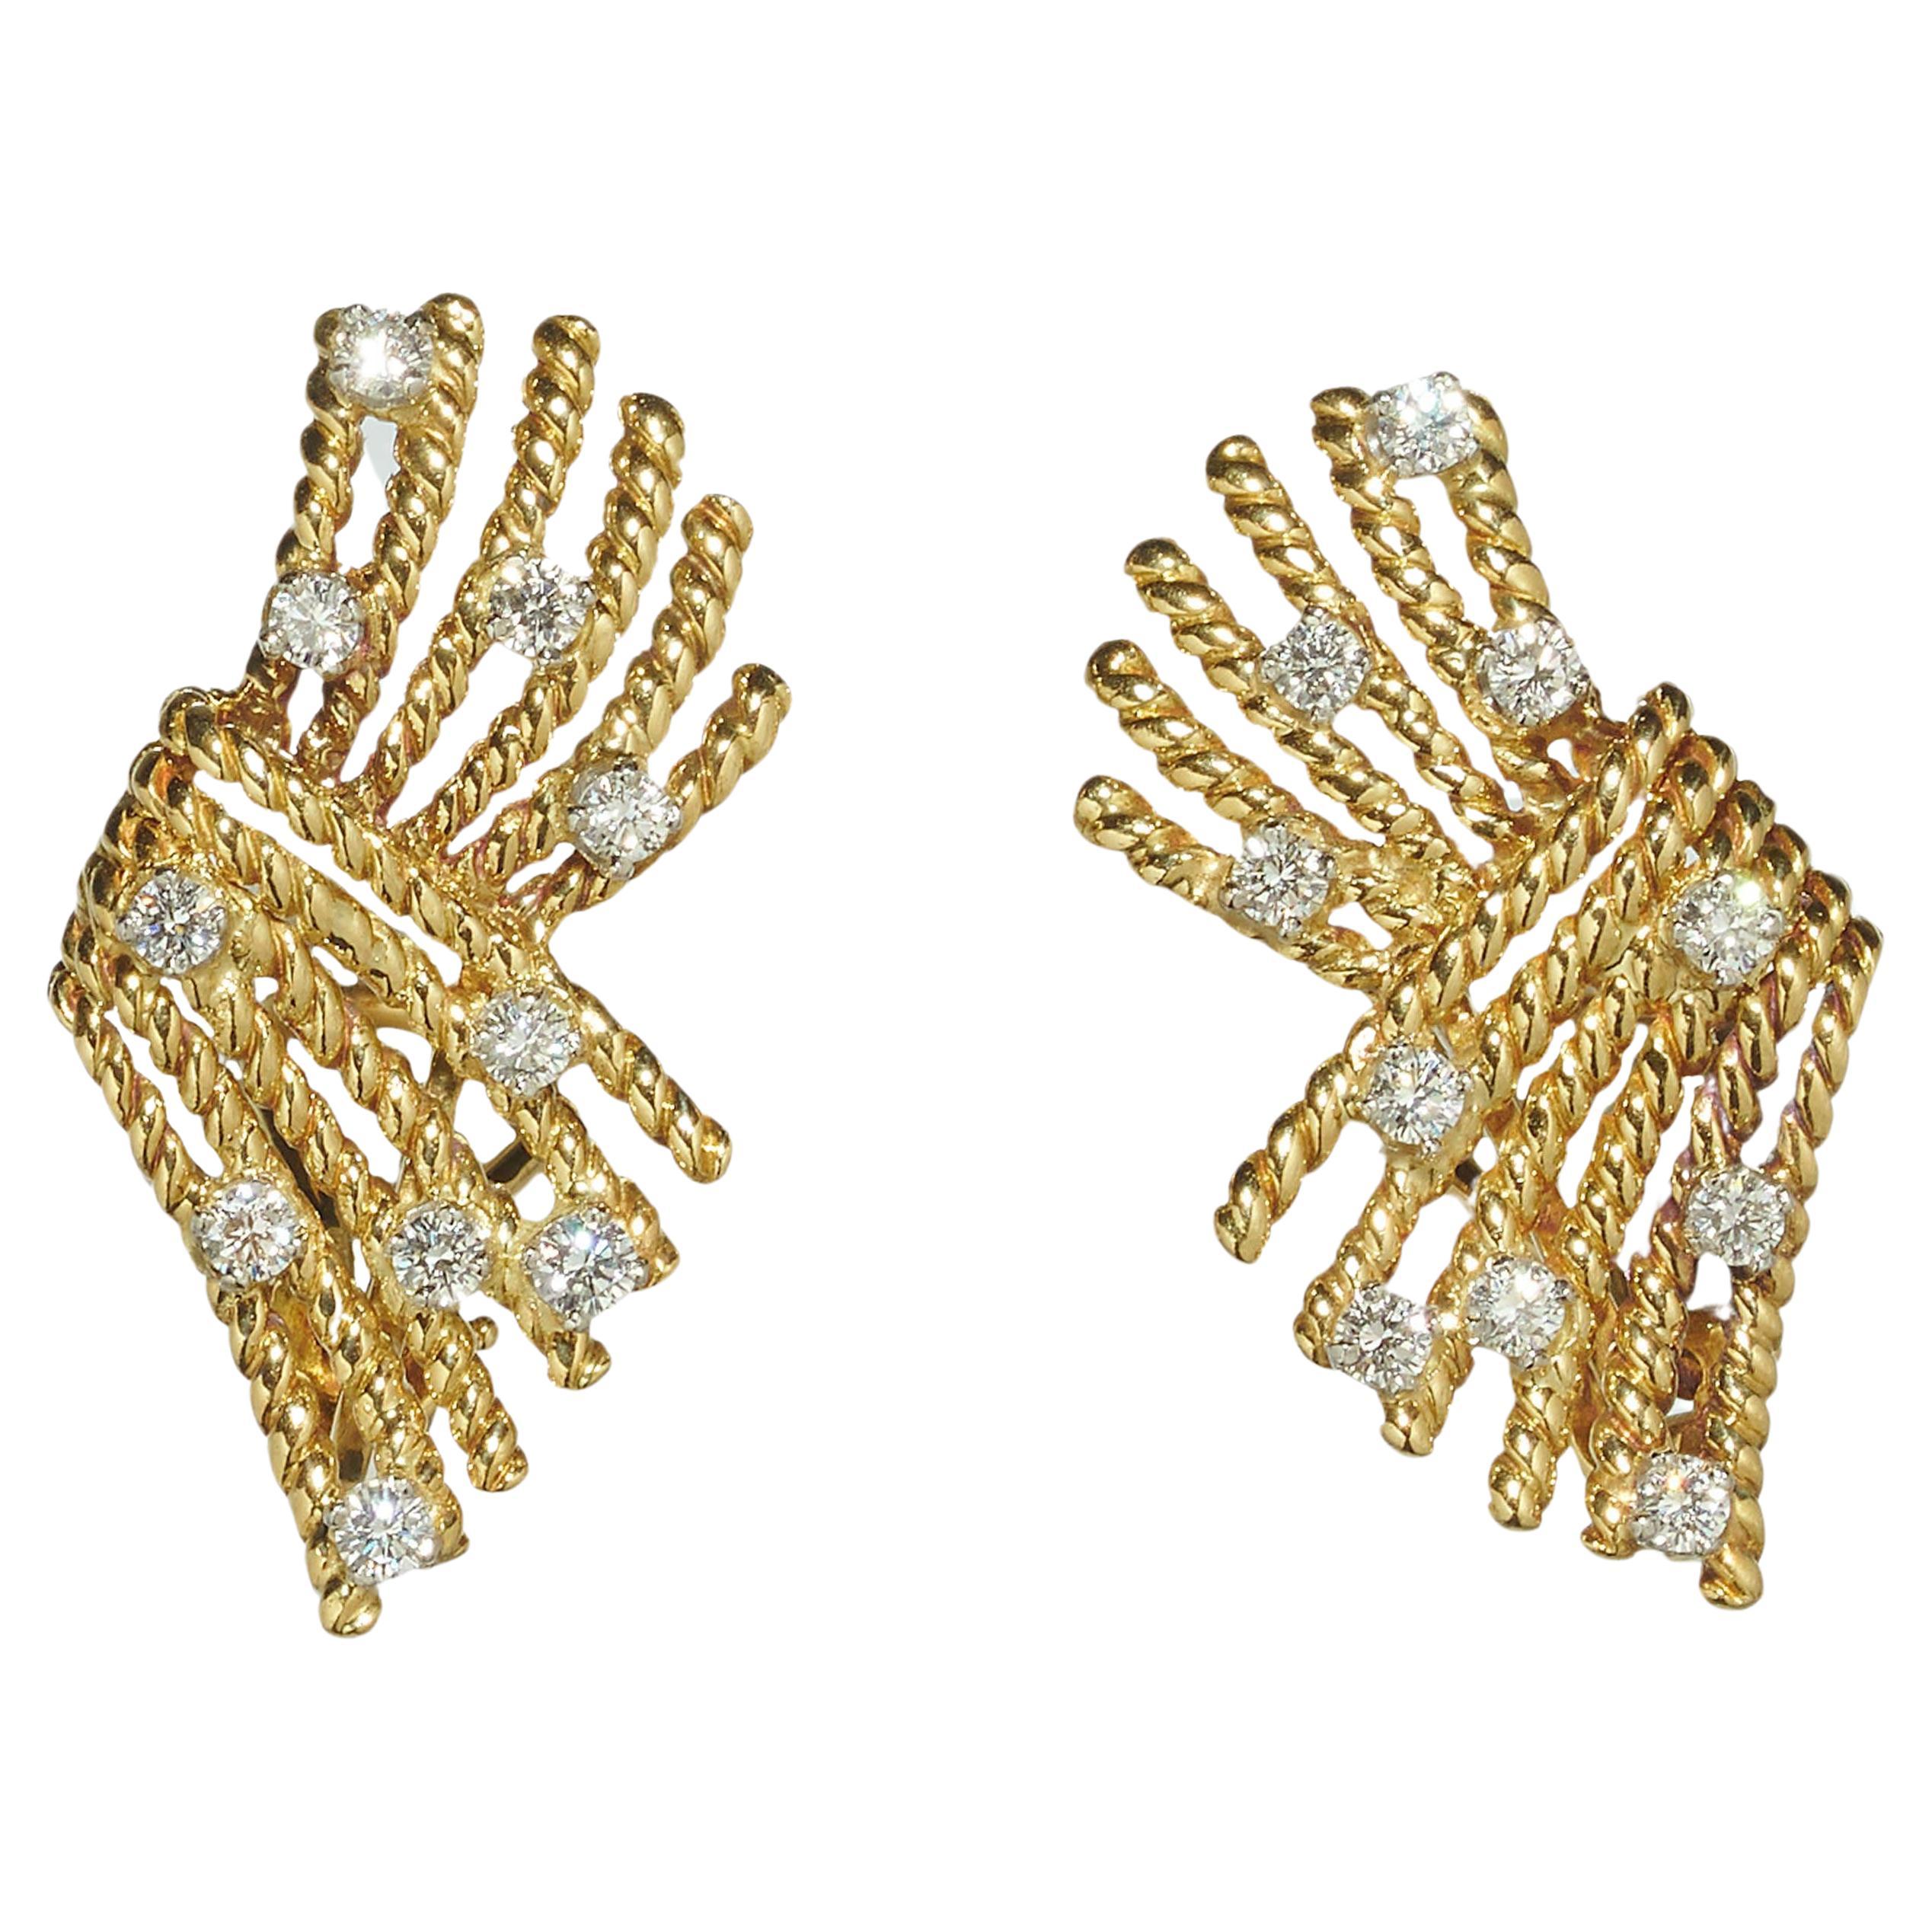 Vintage Schlumberger For Tiffany & Co. "V-Rope" Diamond Earrings, Circa 1980 For Sale